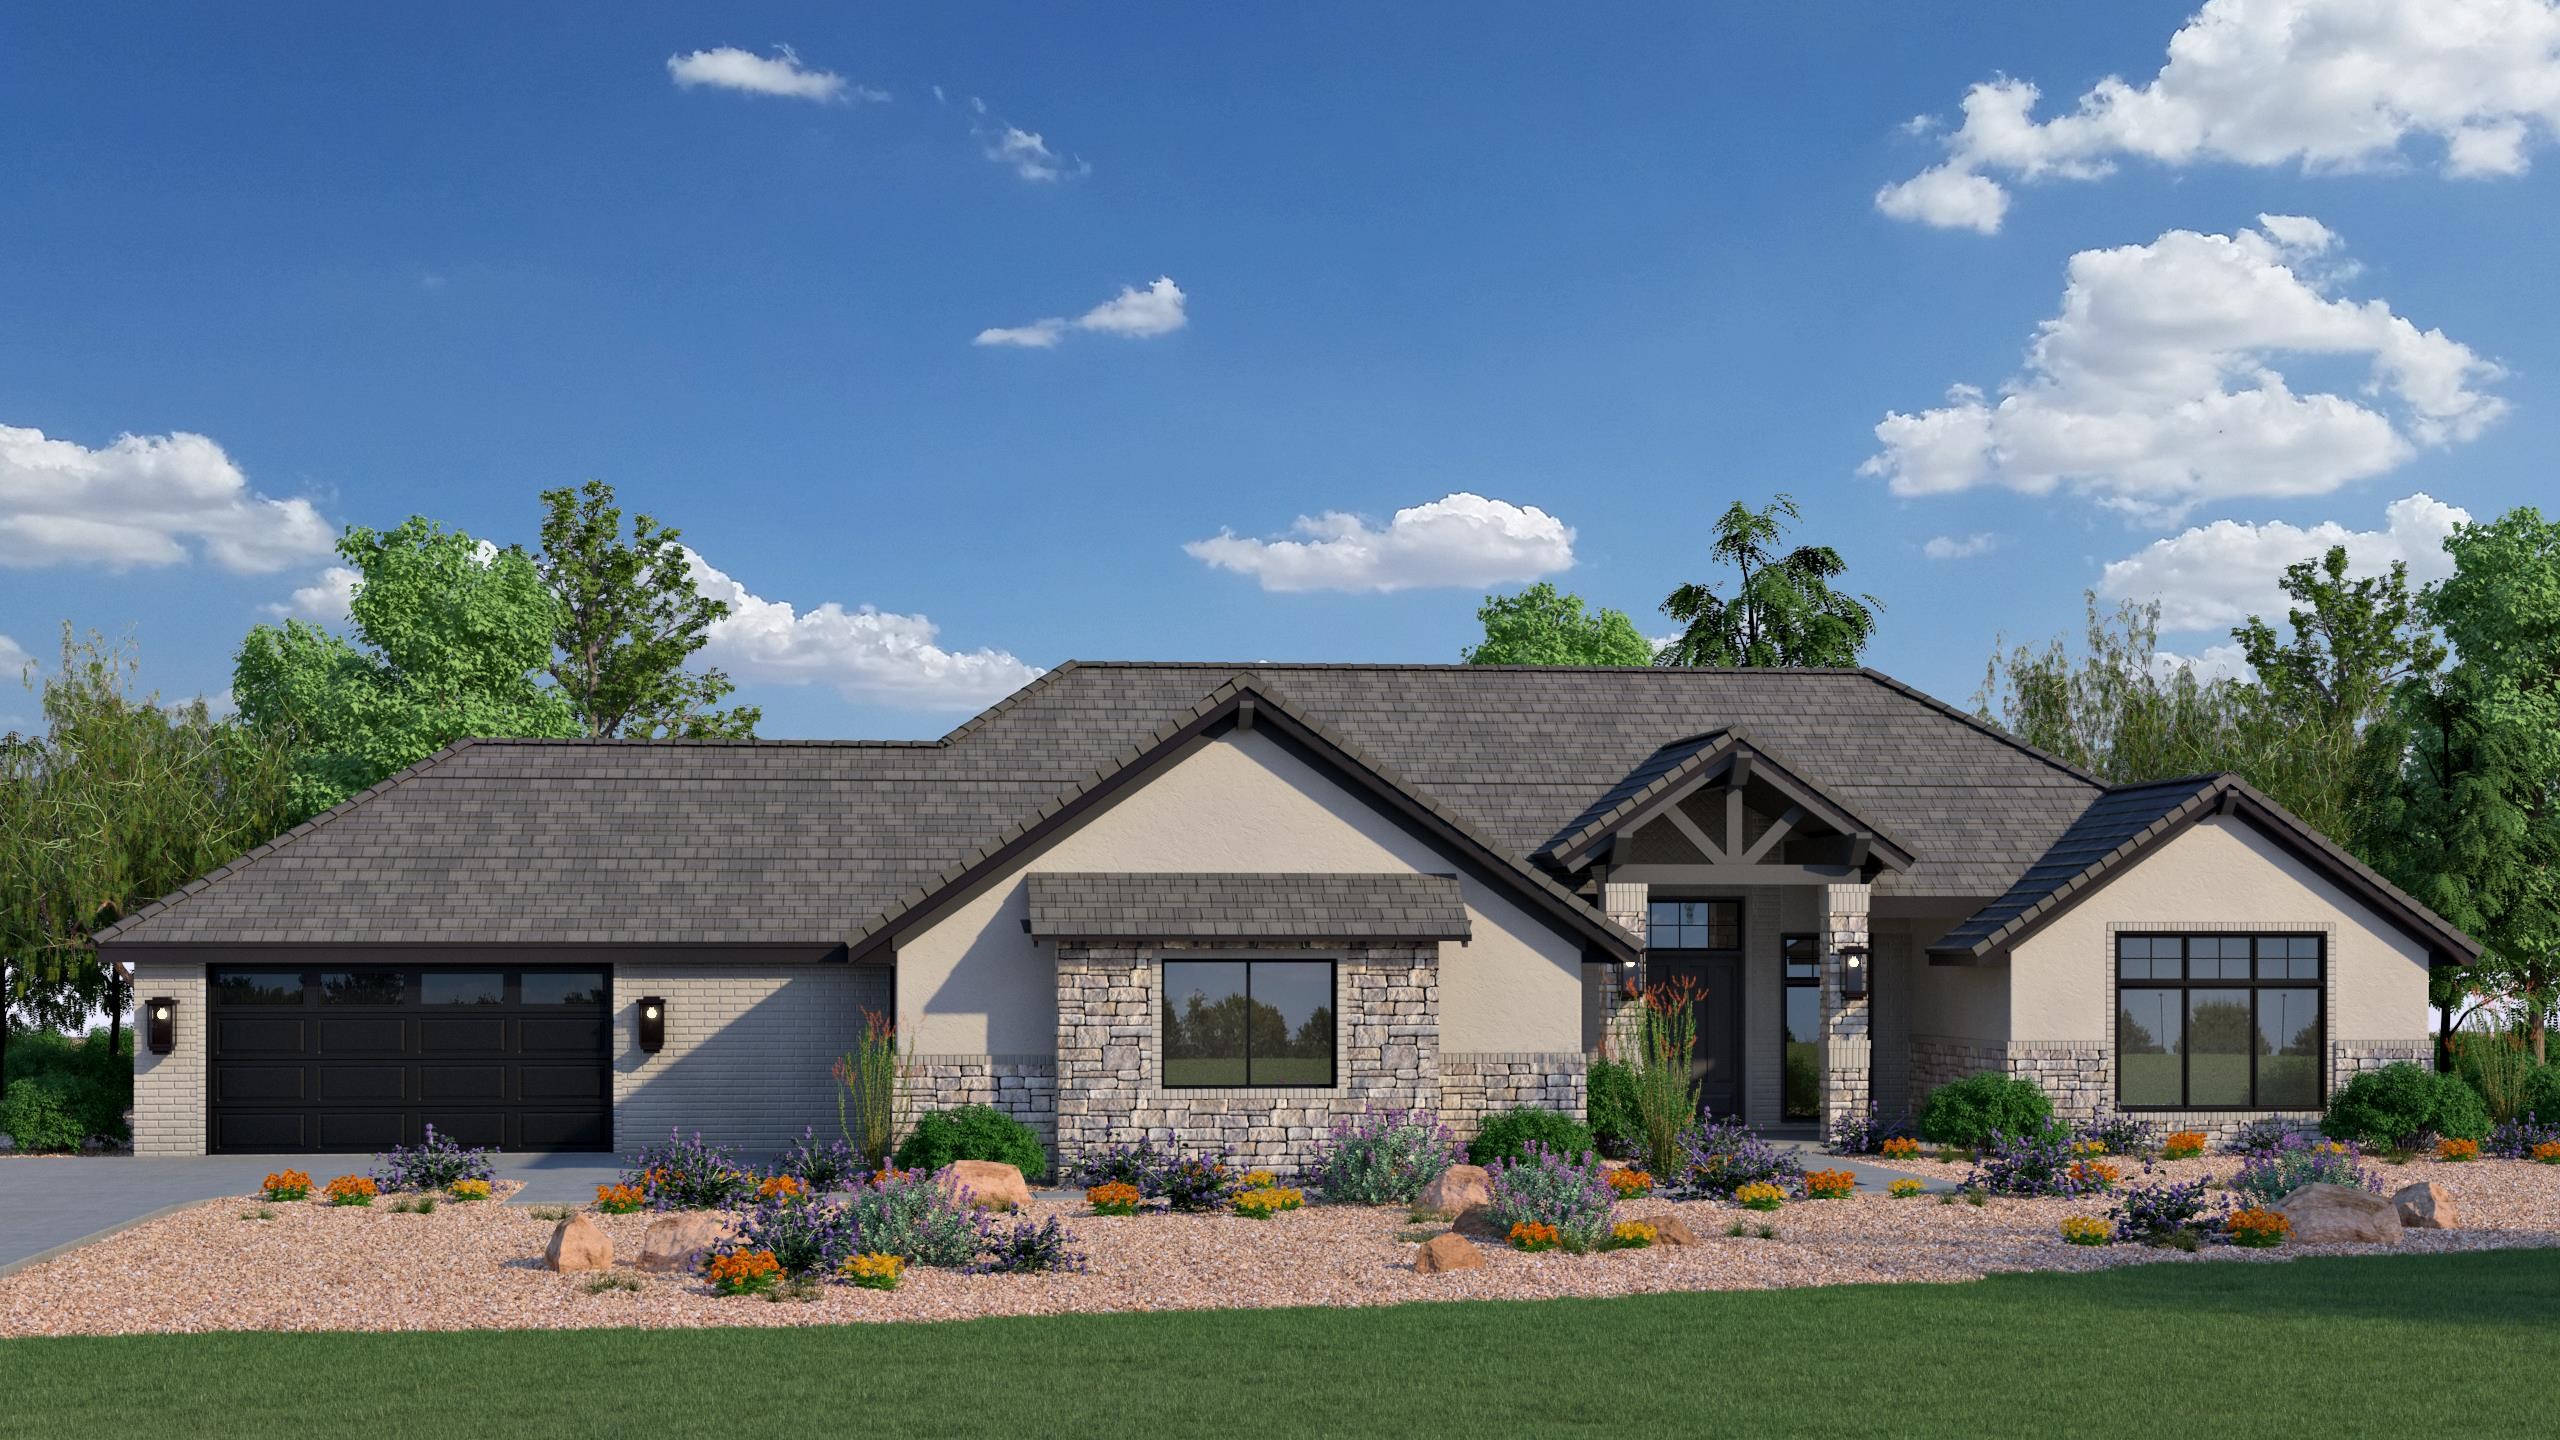 Great new plan by McCollom Construction featuring 5 bedrooms, 5 full baths, 2 half baths and nearly 